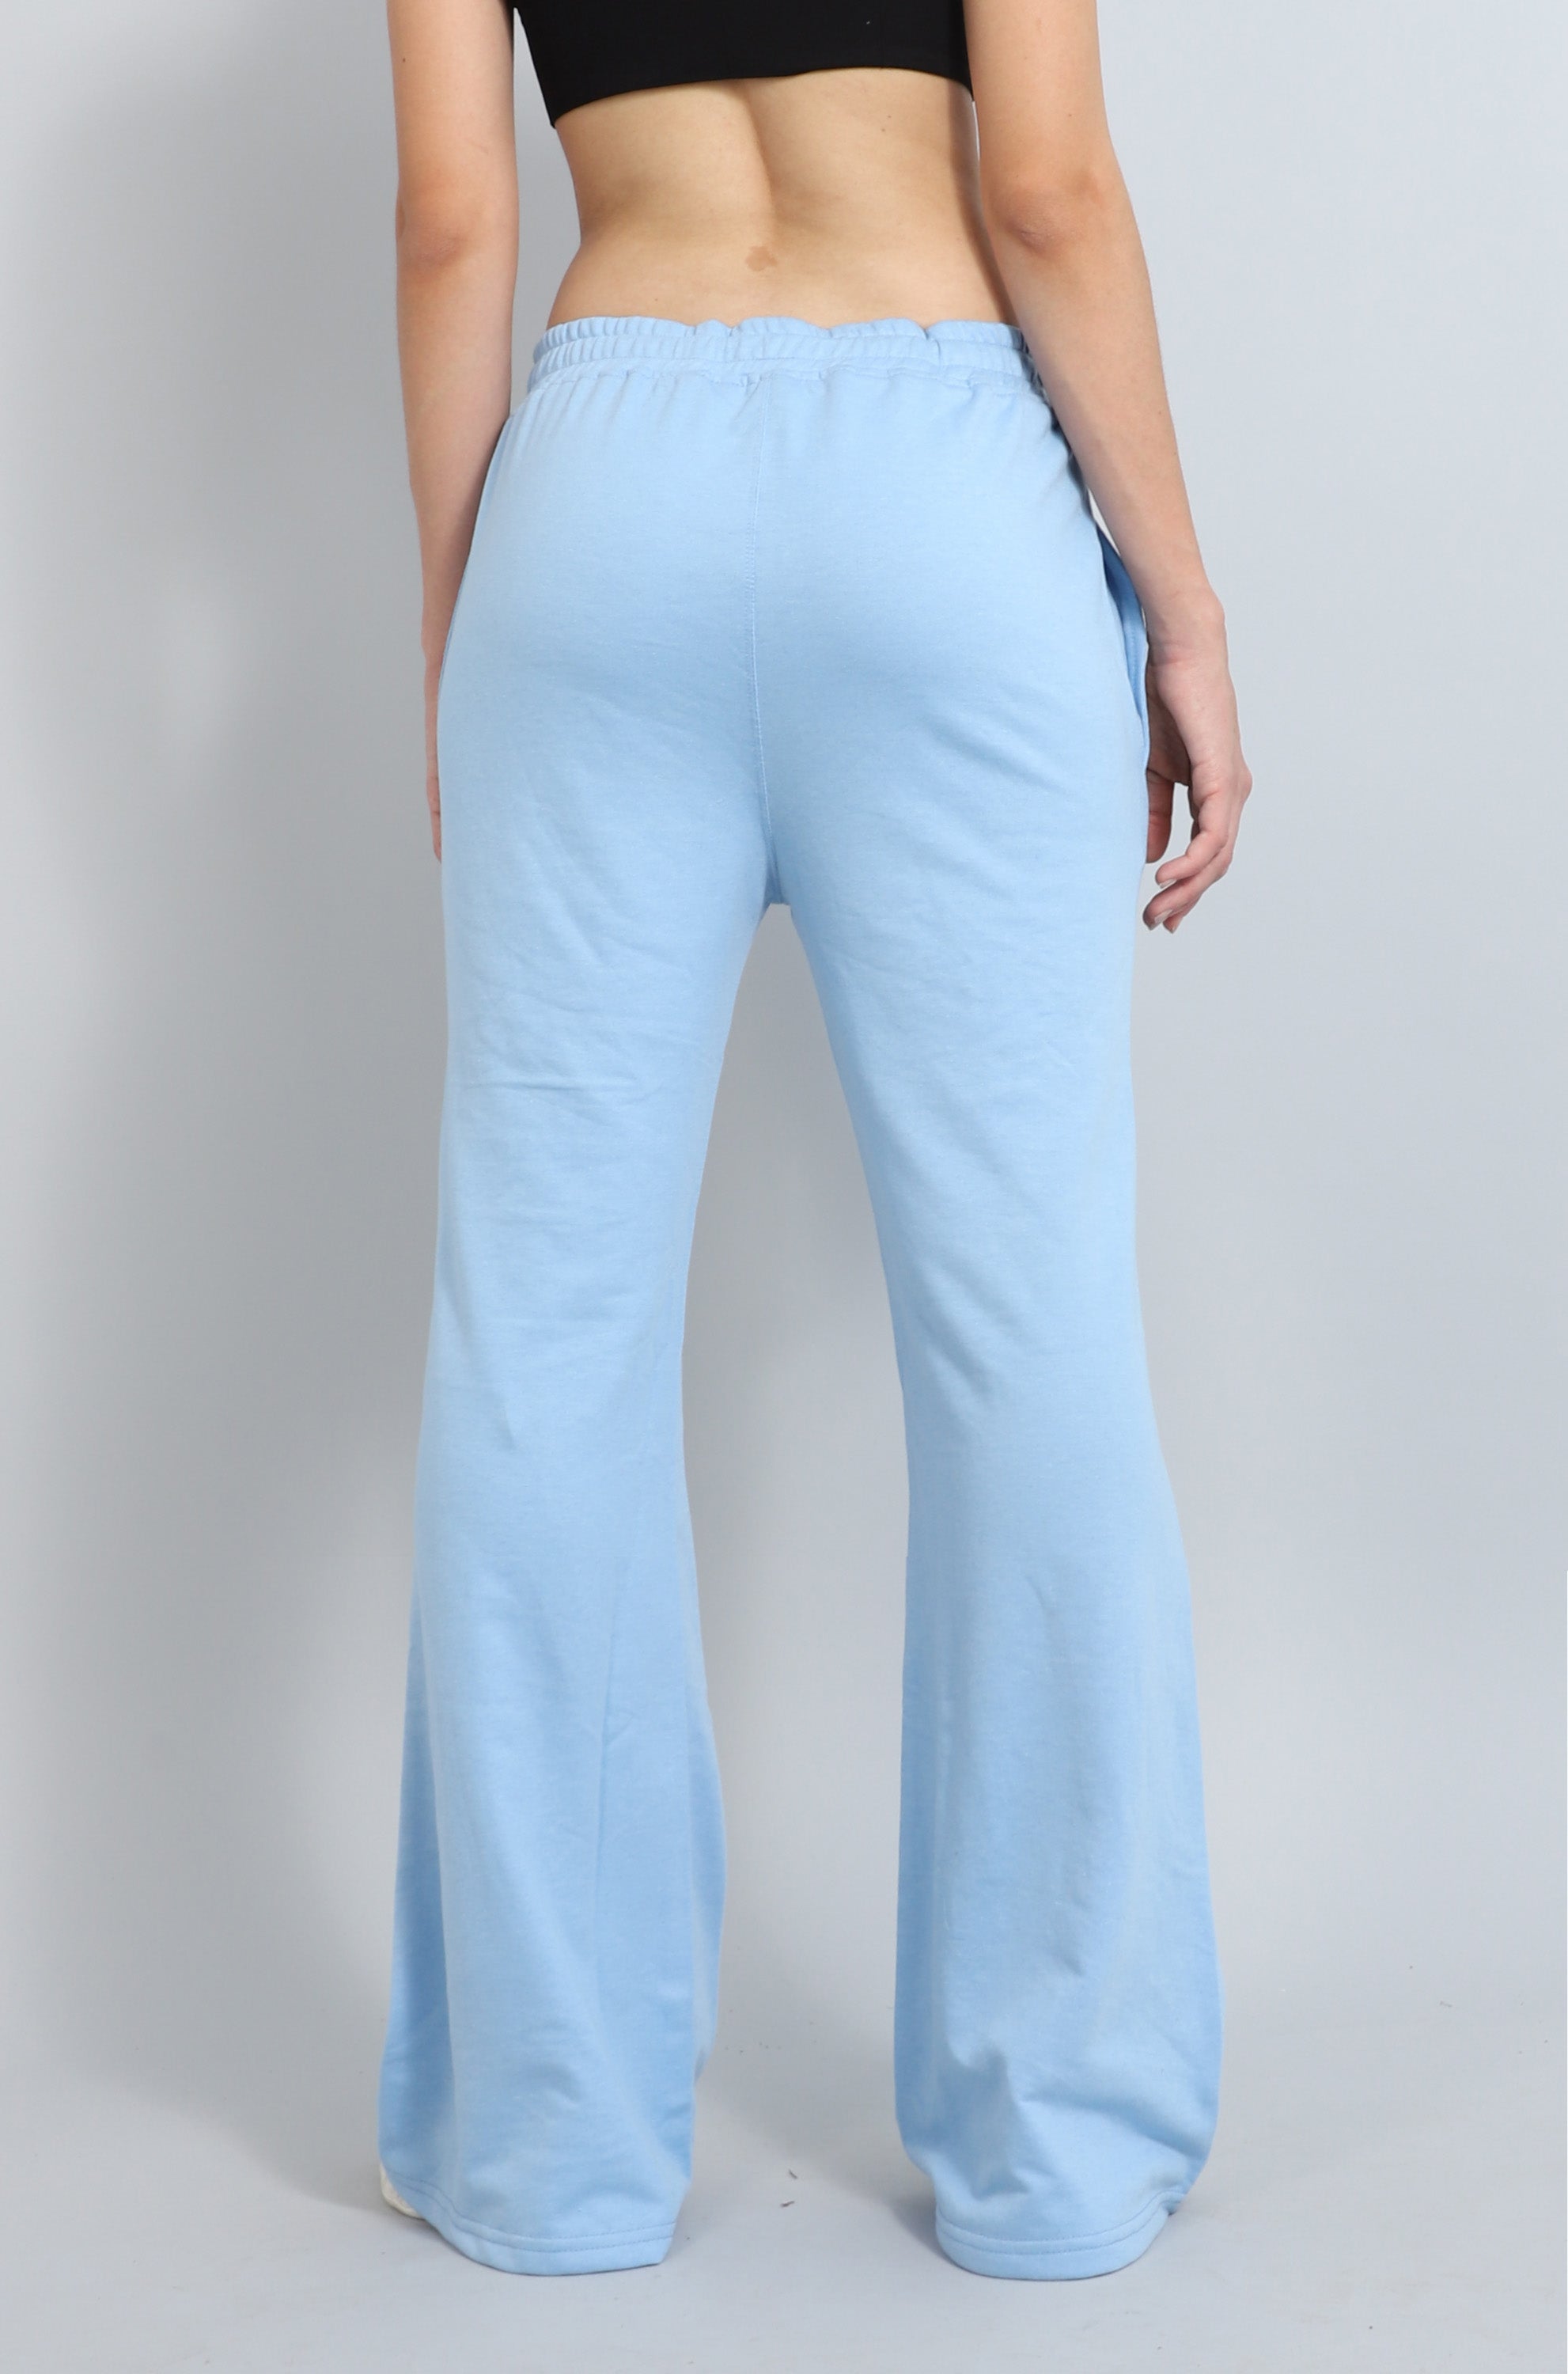 Buy Sky Blue Solid Cotton Trouser Pant for Best Price, Reviews, Free  Shipping